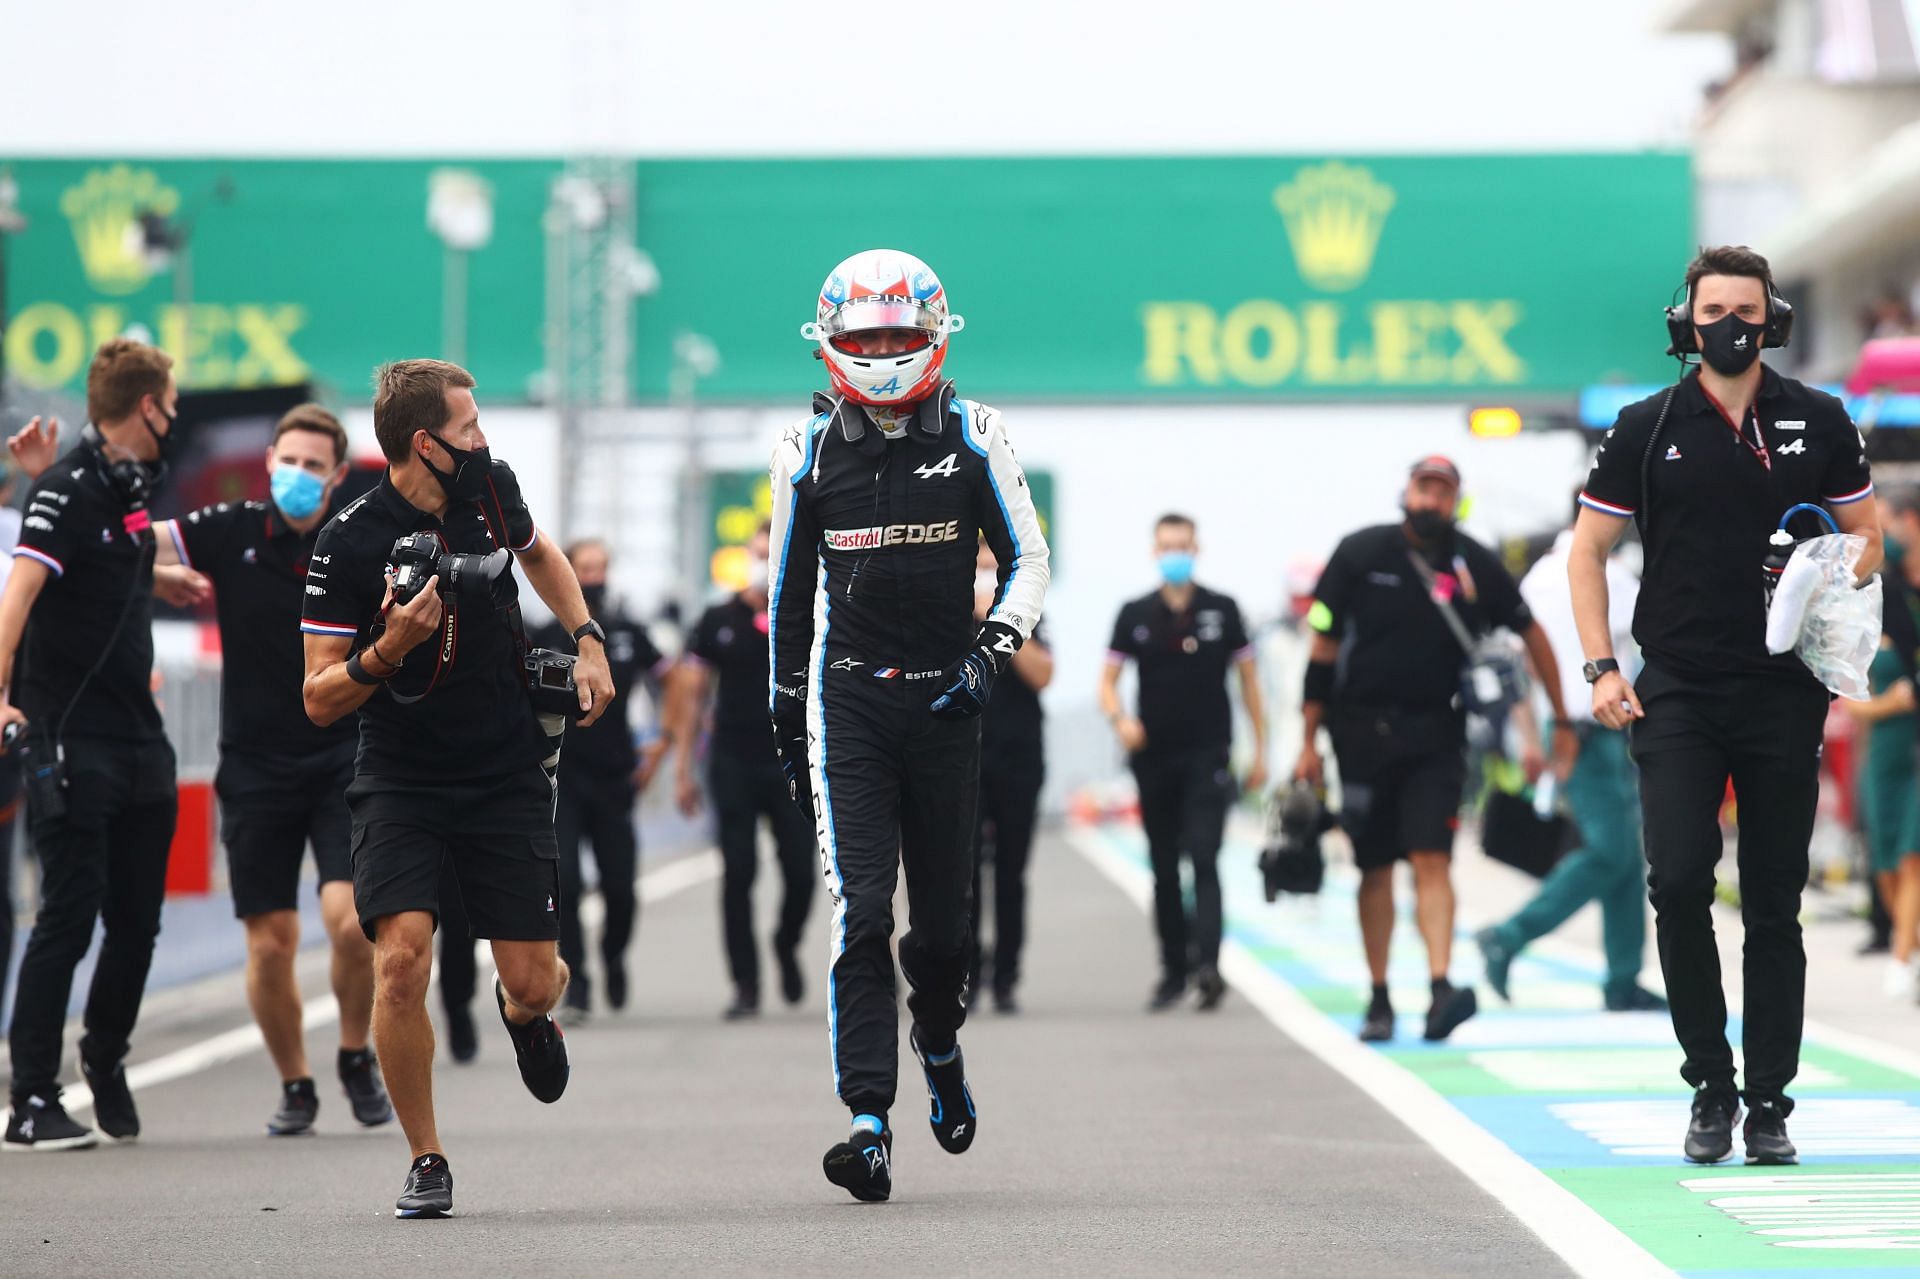 Esteban Ocon runs in the pitlane after winning the 2021 F1 Hungarian GP (Photo by Mark Thompson/Getty Images)